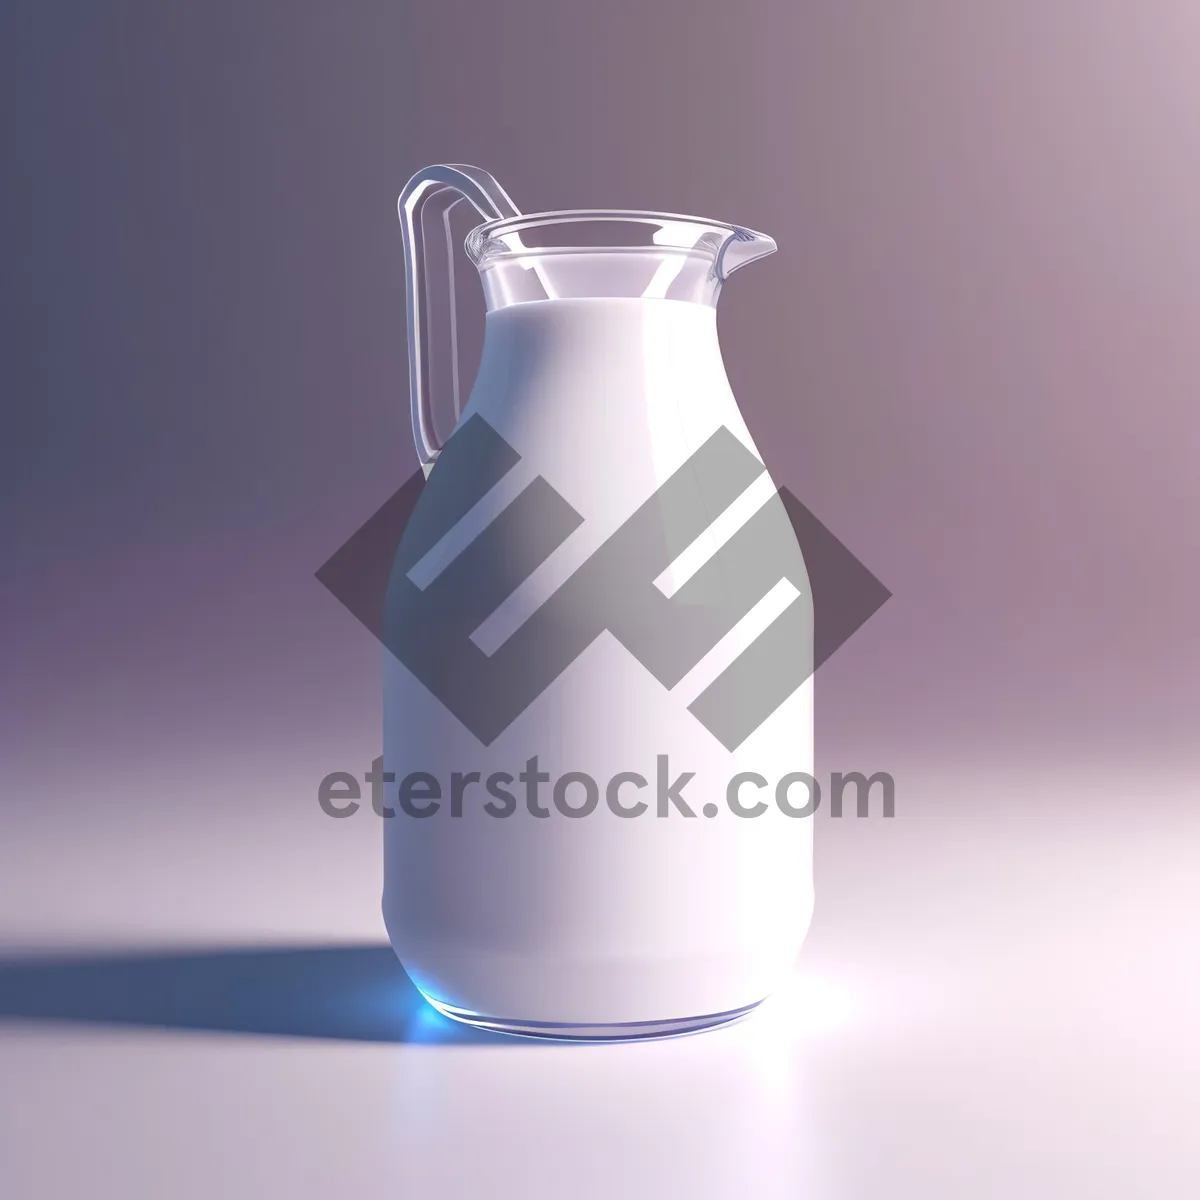 Picture of Transparent Glass Water Jug - Laboratory Glassware